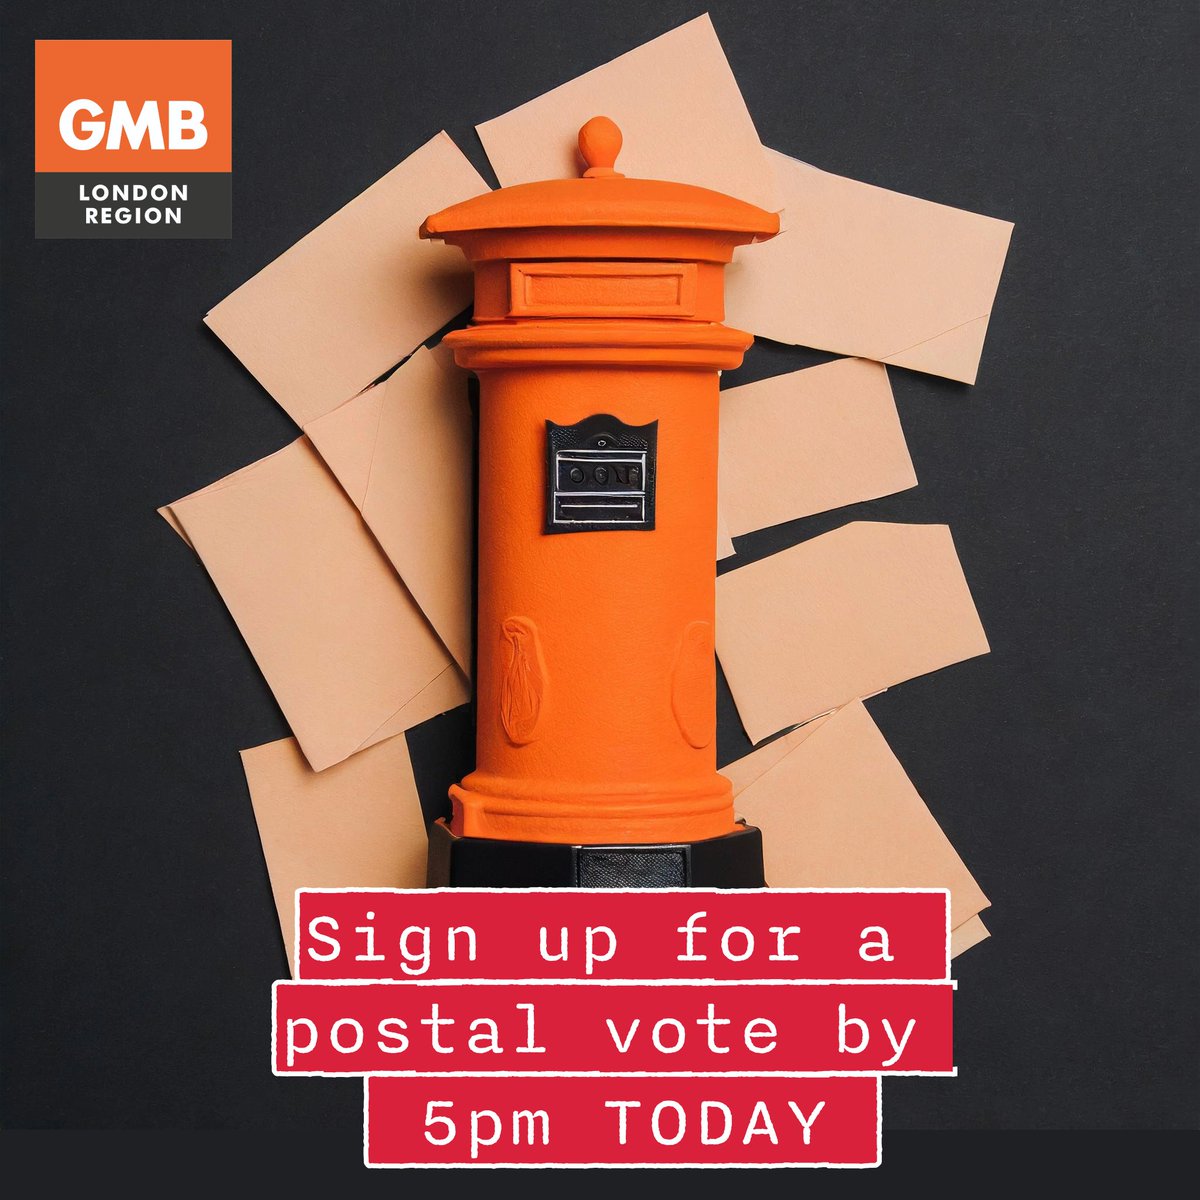 Today is the last chance to sign up for a postal vote for elections on Thursday 2nd May. It's quick and easy to sign up (I've just done mine) and makes voting more convenient...plus you won't need to remember your photo ID! Register here by 5pm TODAY! gov.uk/apply-postal-v…